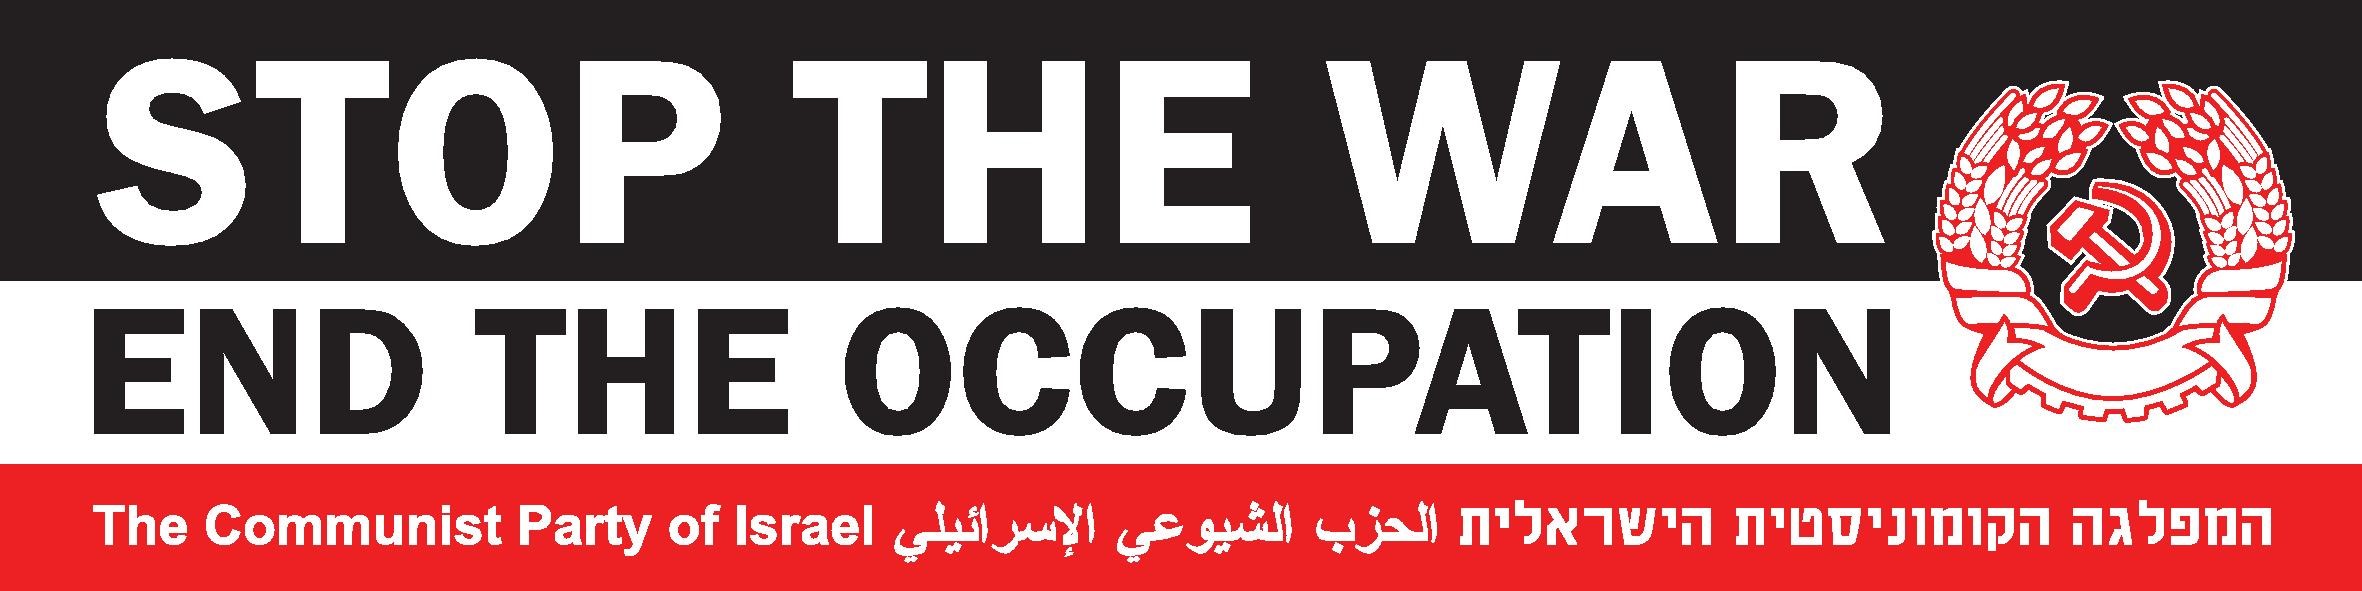 Stop the war End the occupation